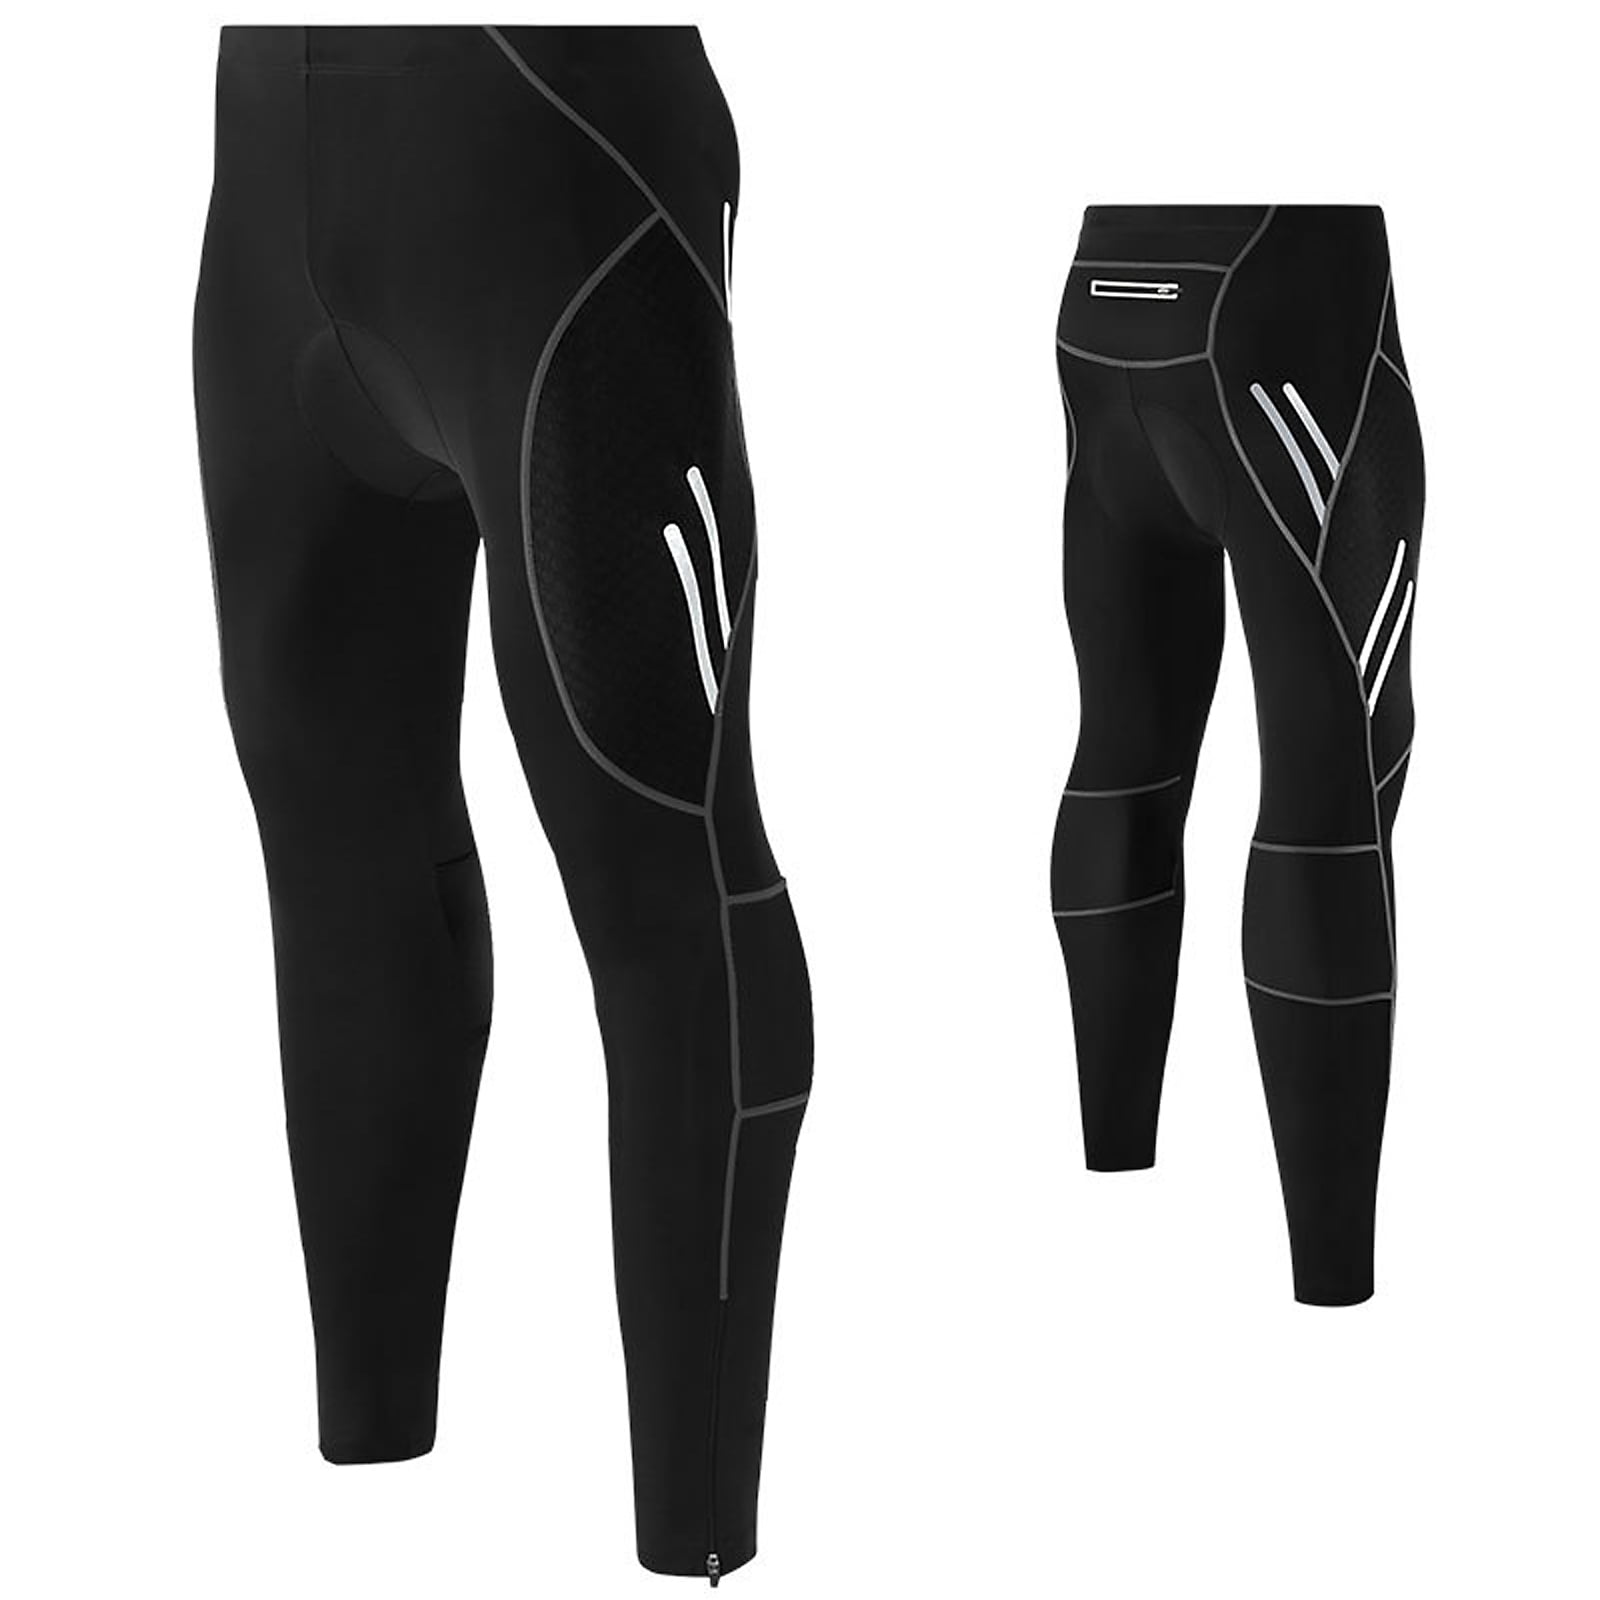 Cycling Pants Women's Padded Bicycle Pants Tights Ladies Reflective Long Trouser 